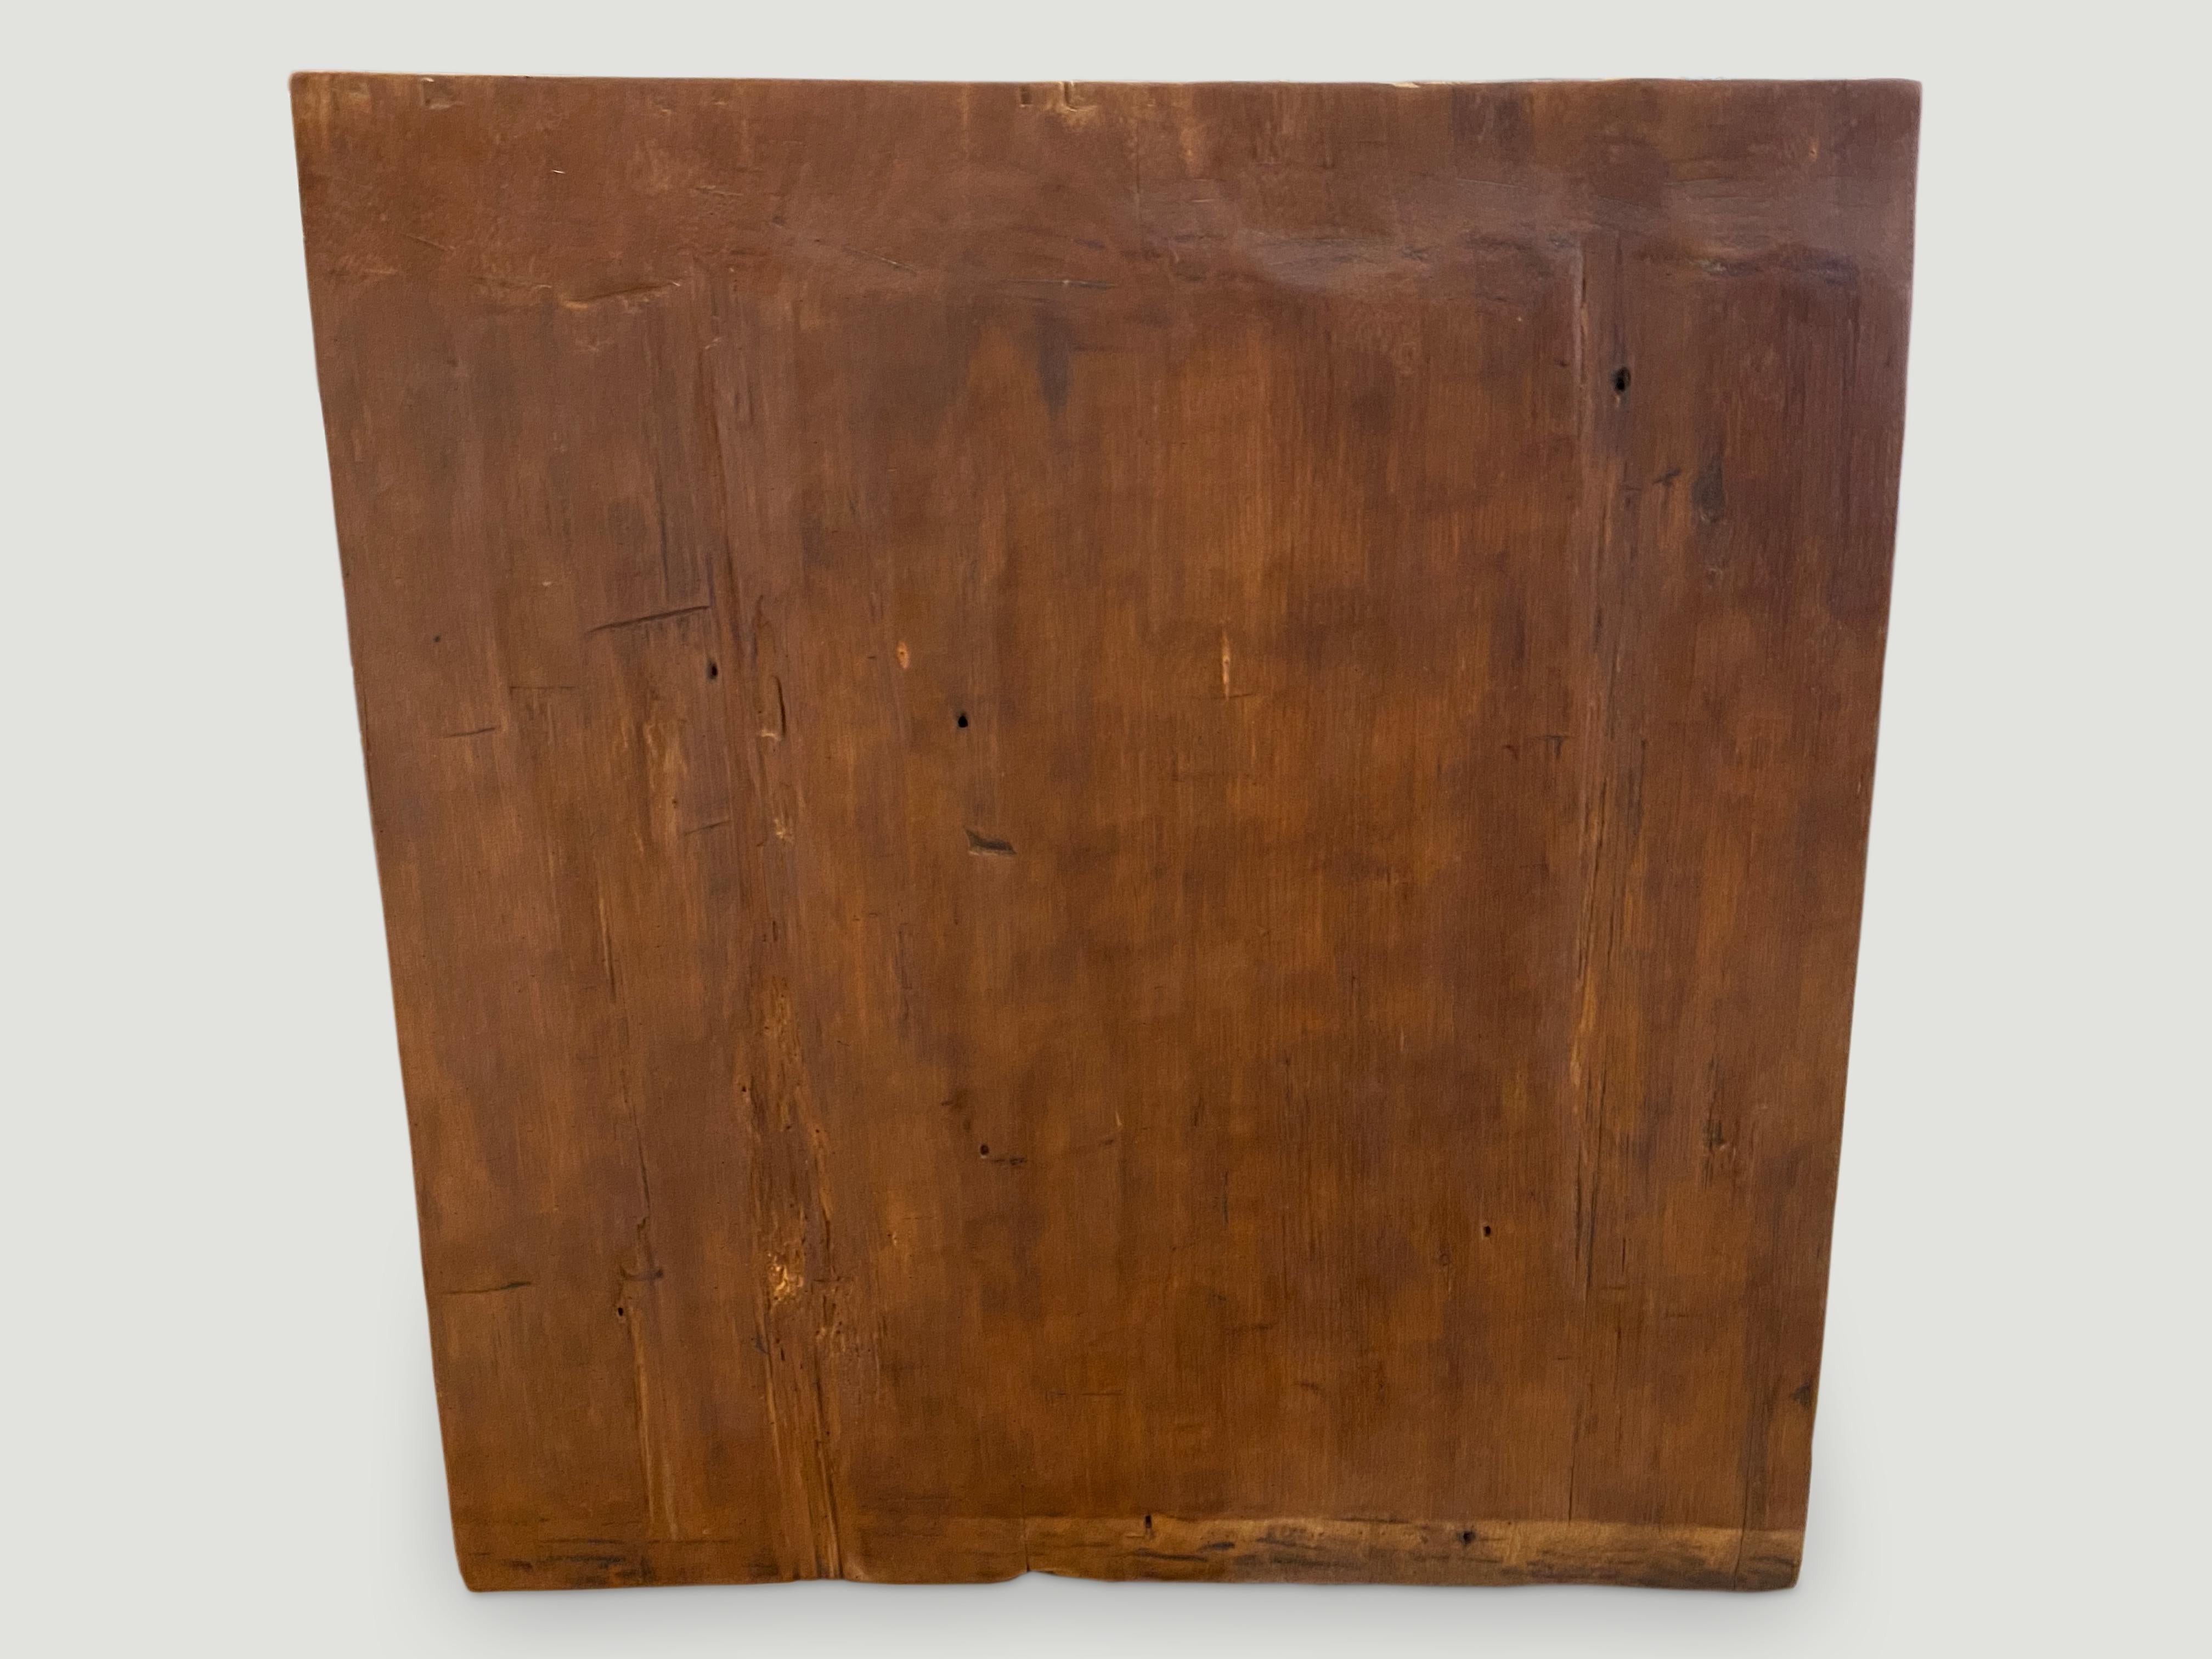 Andrianna Shamaris Antique Teak Wood Carved Panel In Excellent Condition For Sale In New York, NY